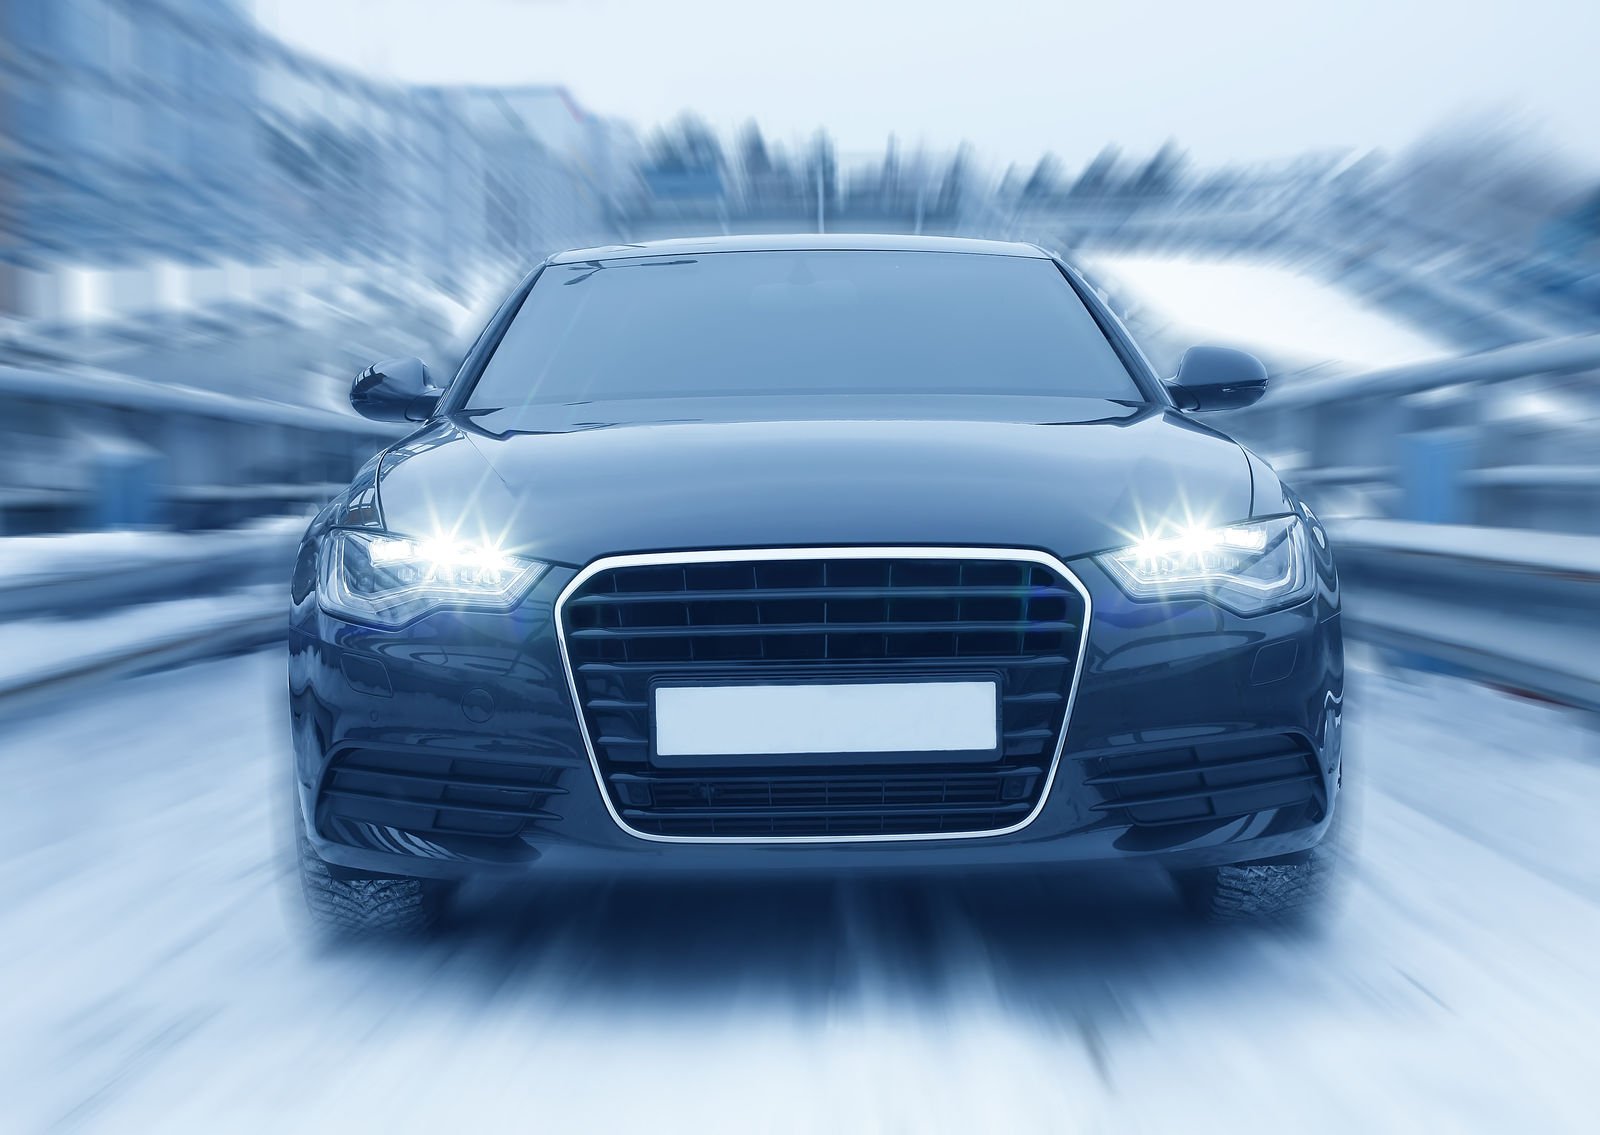 Accidents Caused By Black Ice: Does car insurance cover it?